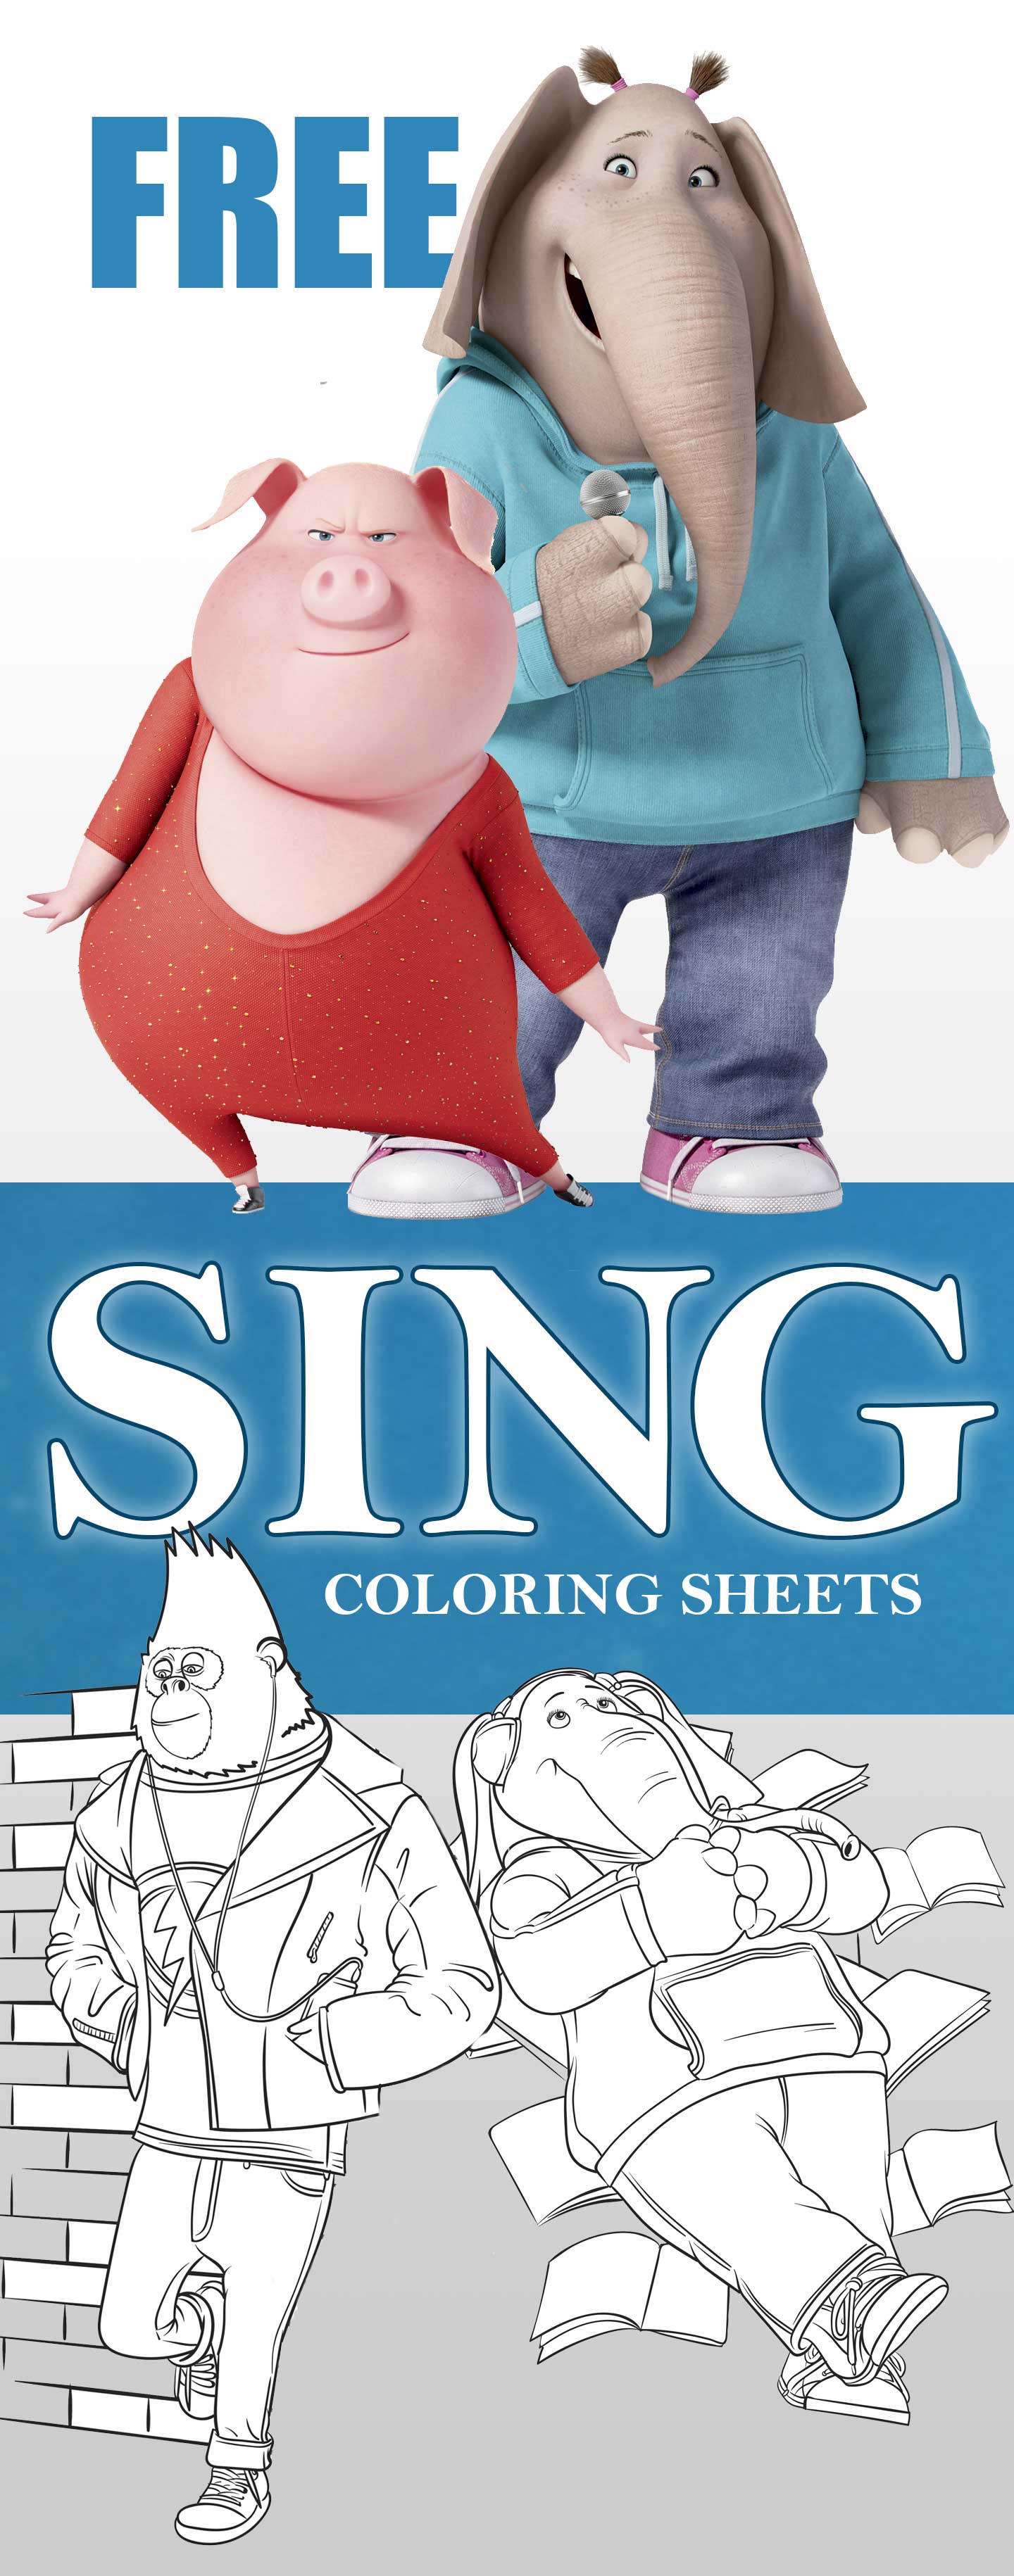 sing movie coloring sheets